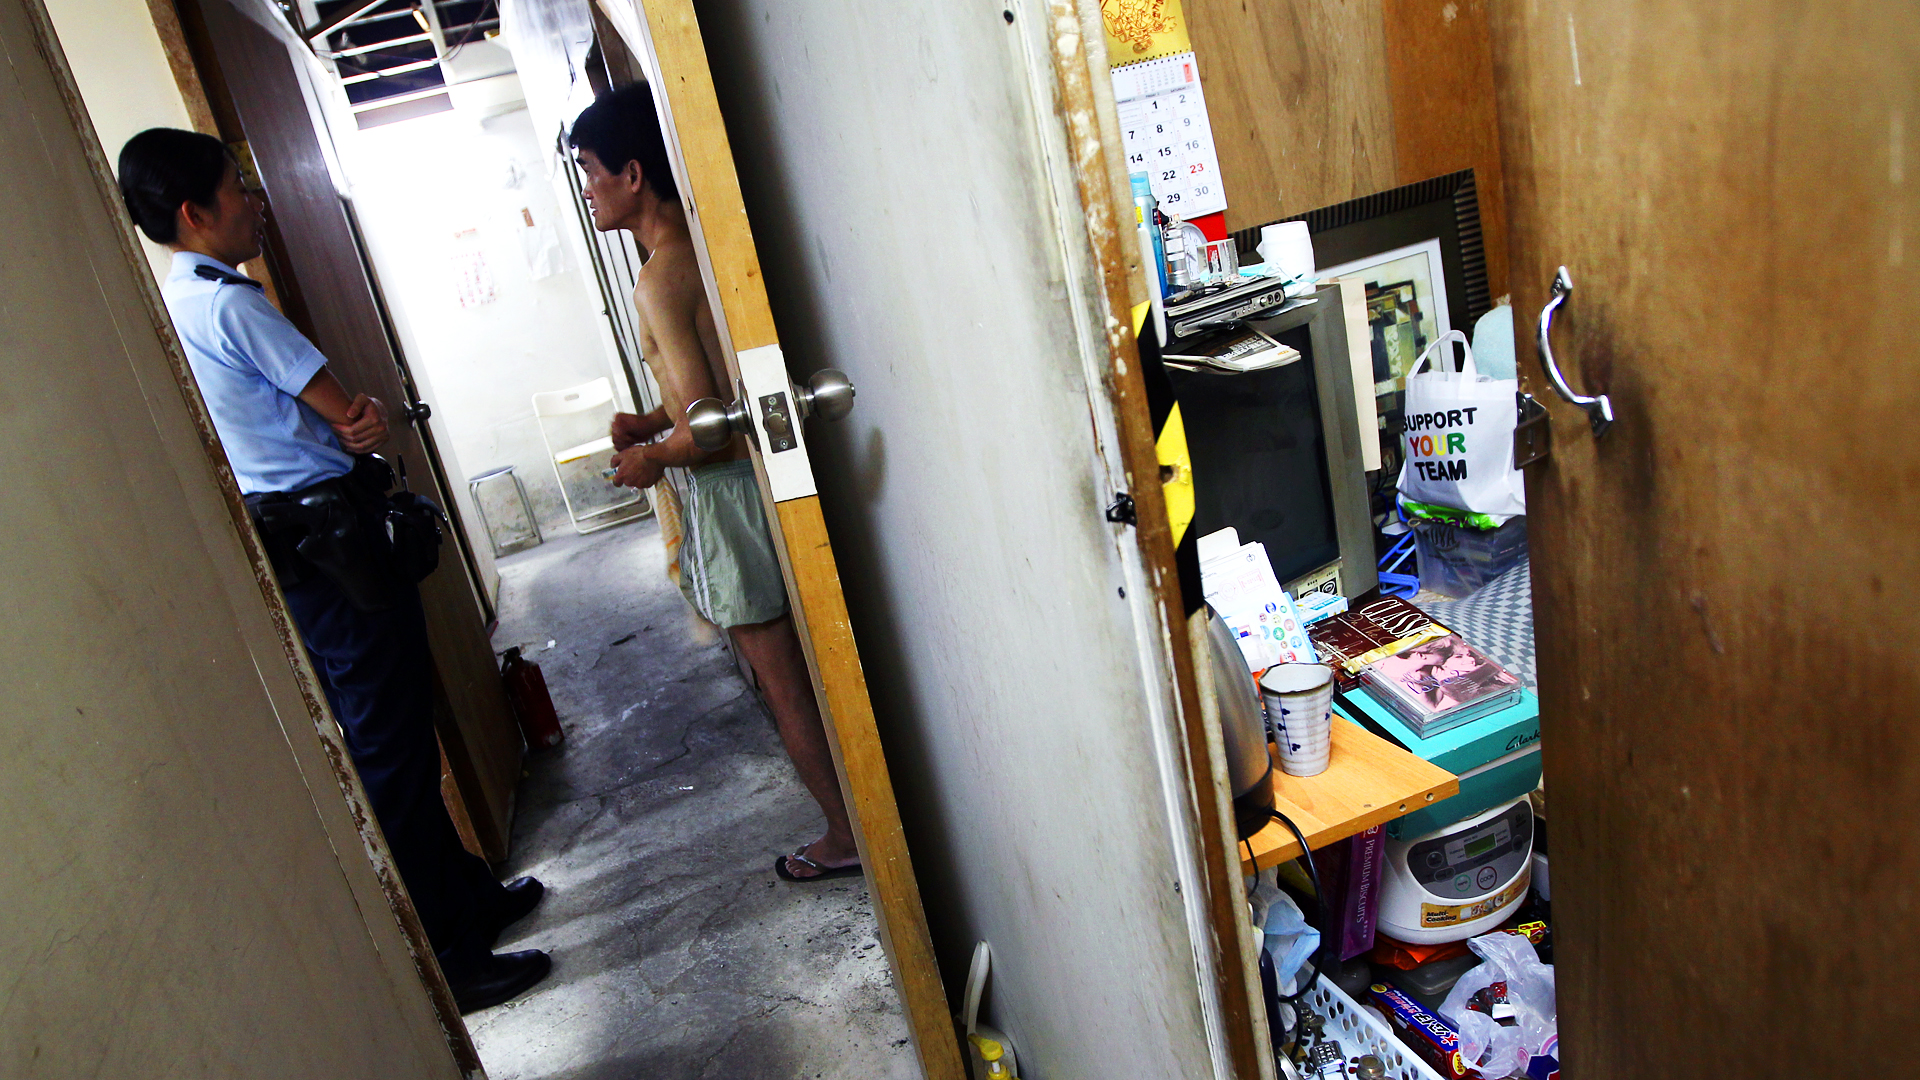 Tenants were forced out of subdivided flats in a factory building in Tai Kok Tsui in 2012. Photo: David Wong